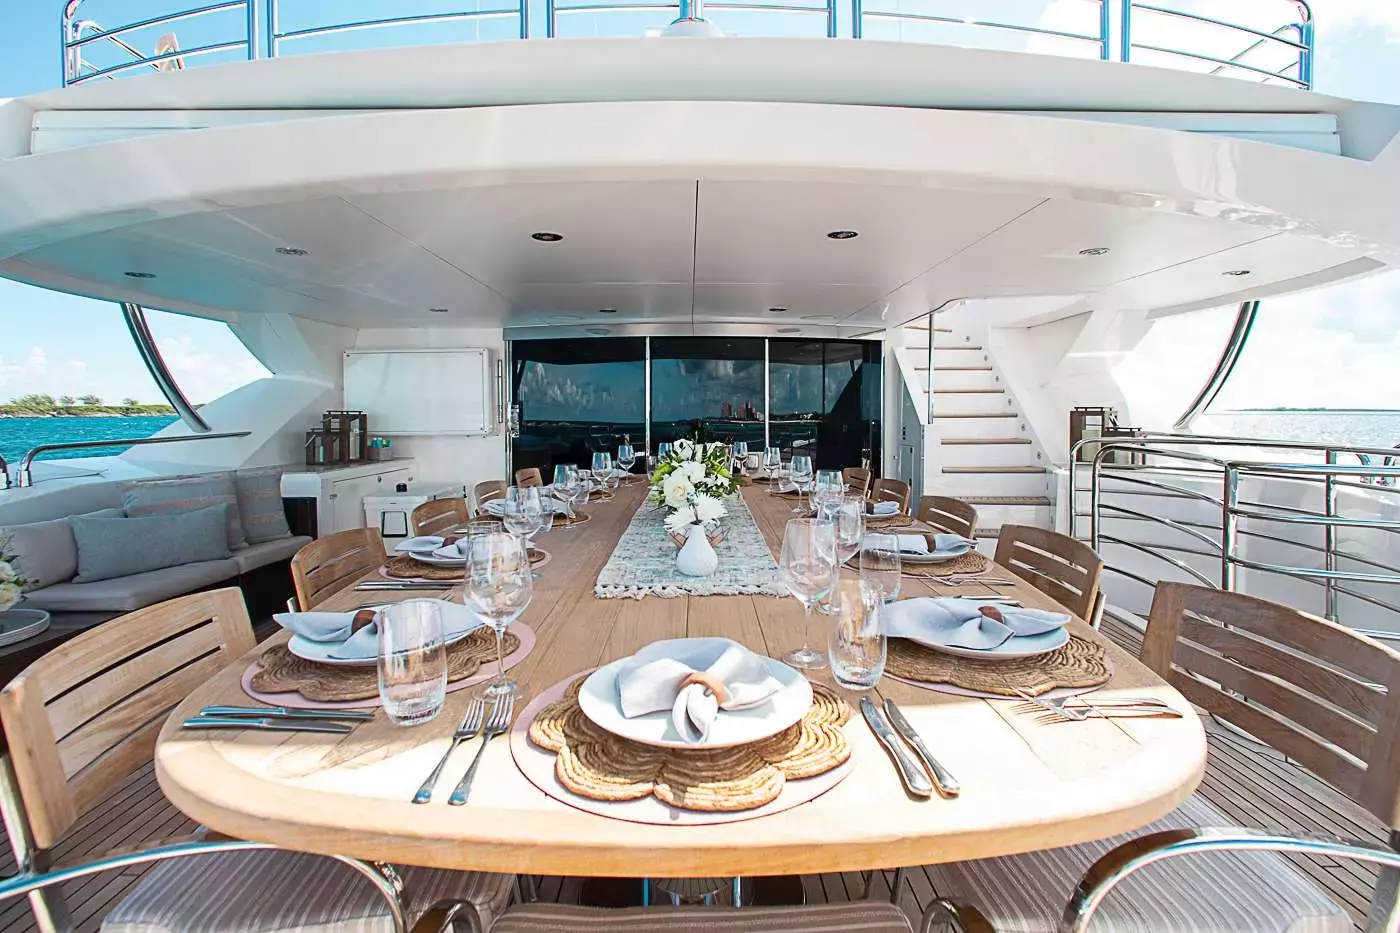 Acacia by Sunseeker - Top rates for a Charter of a private Superyacht in Florida USA